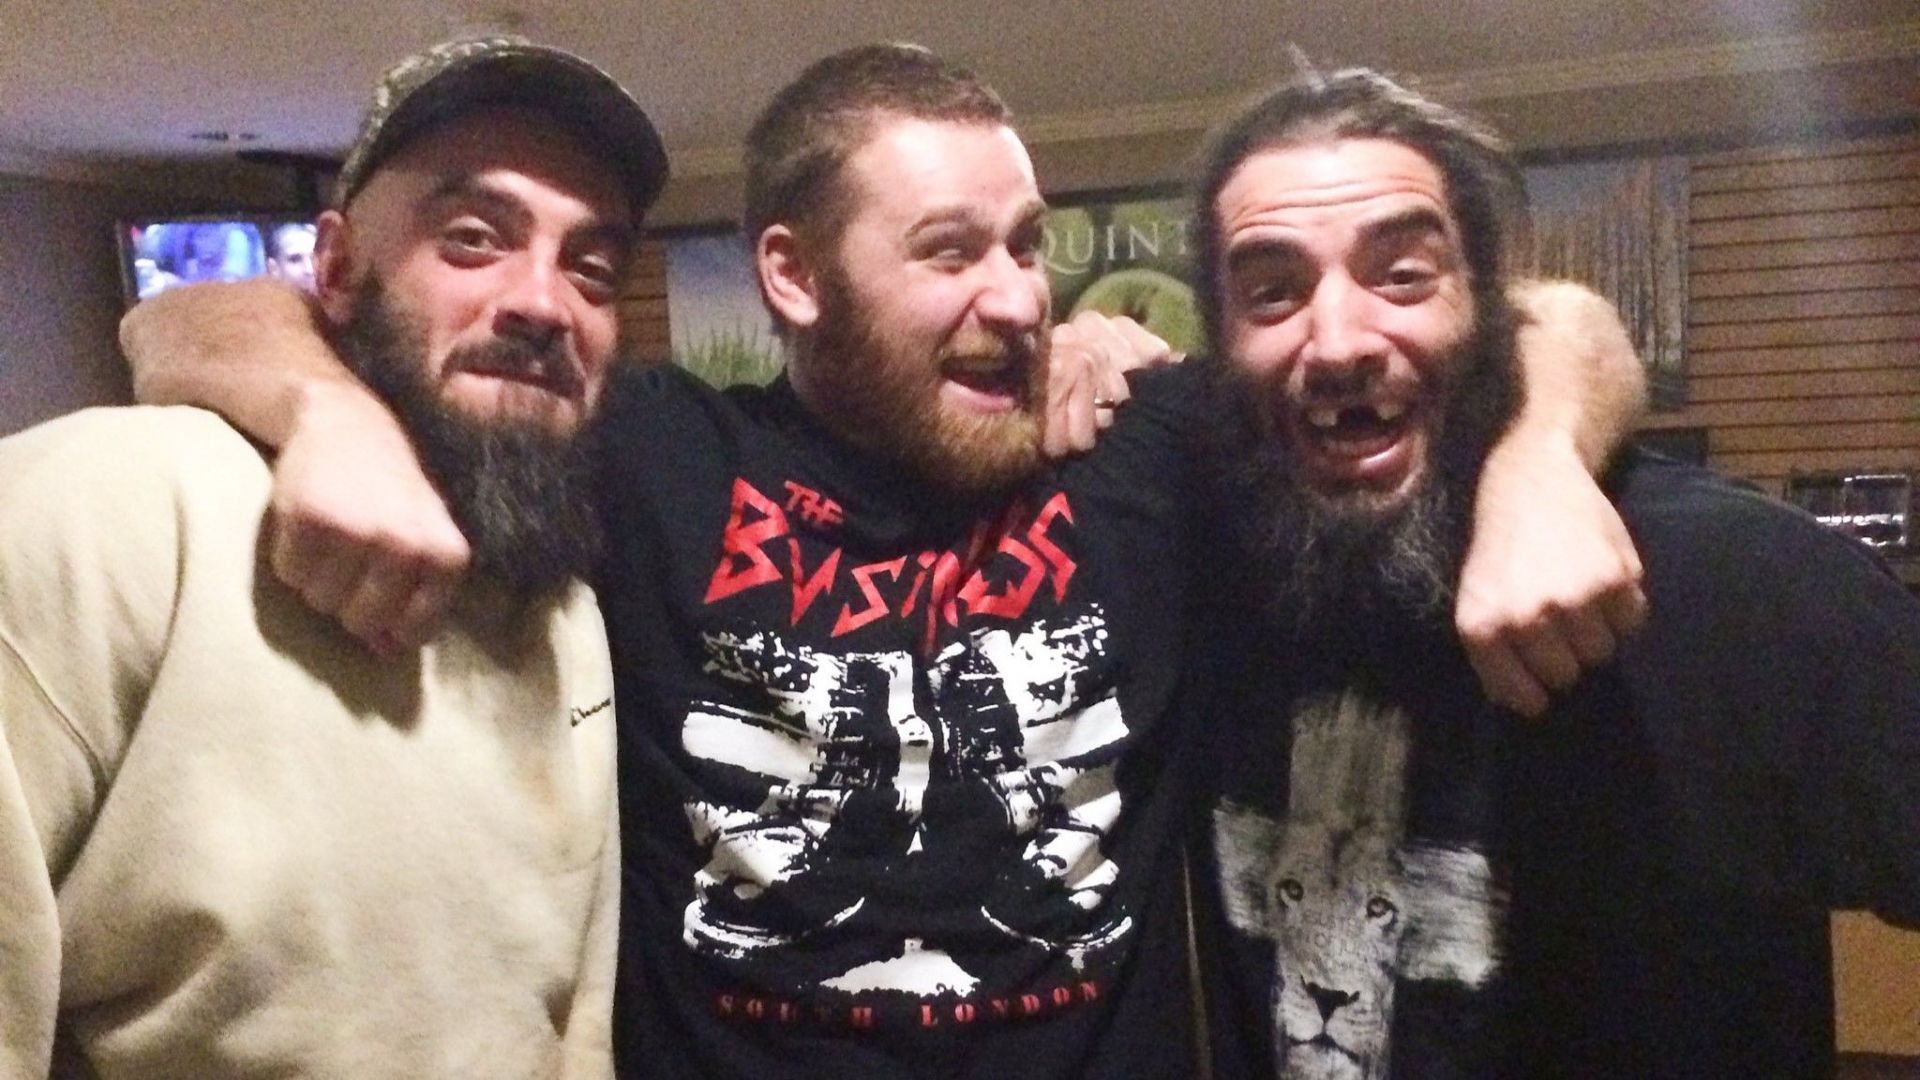 The WWE Superstar with the Briscoe Brothers.